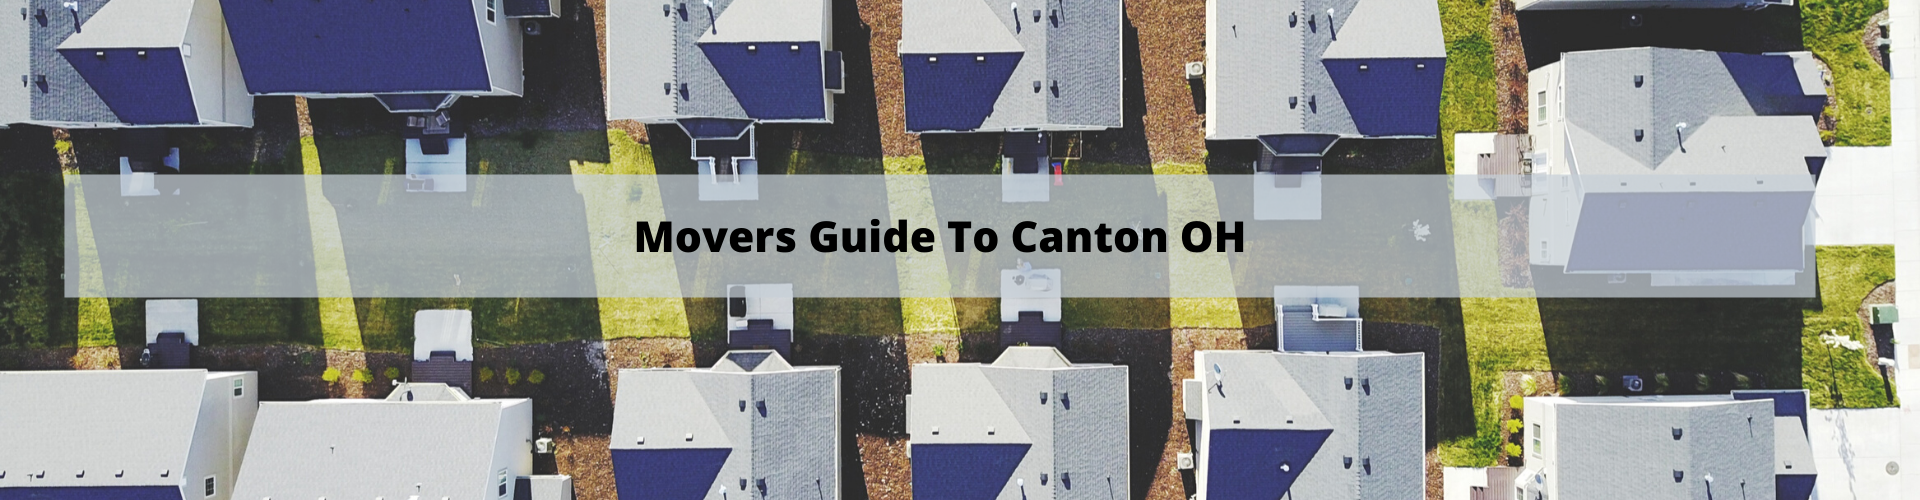 Movers Guide To Canton OH